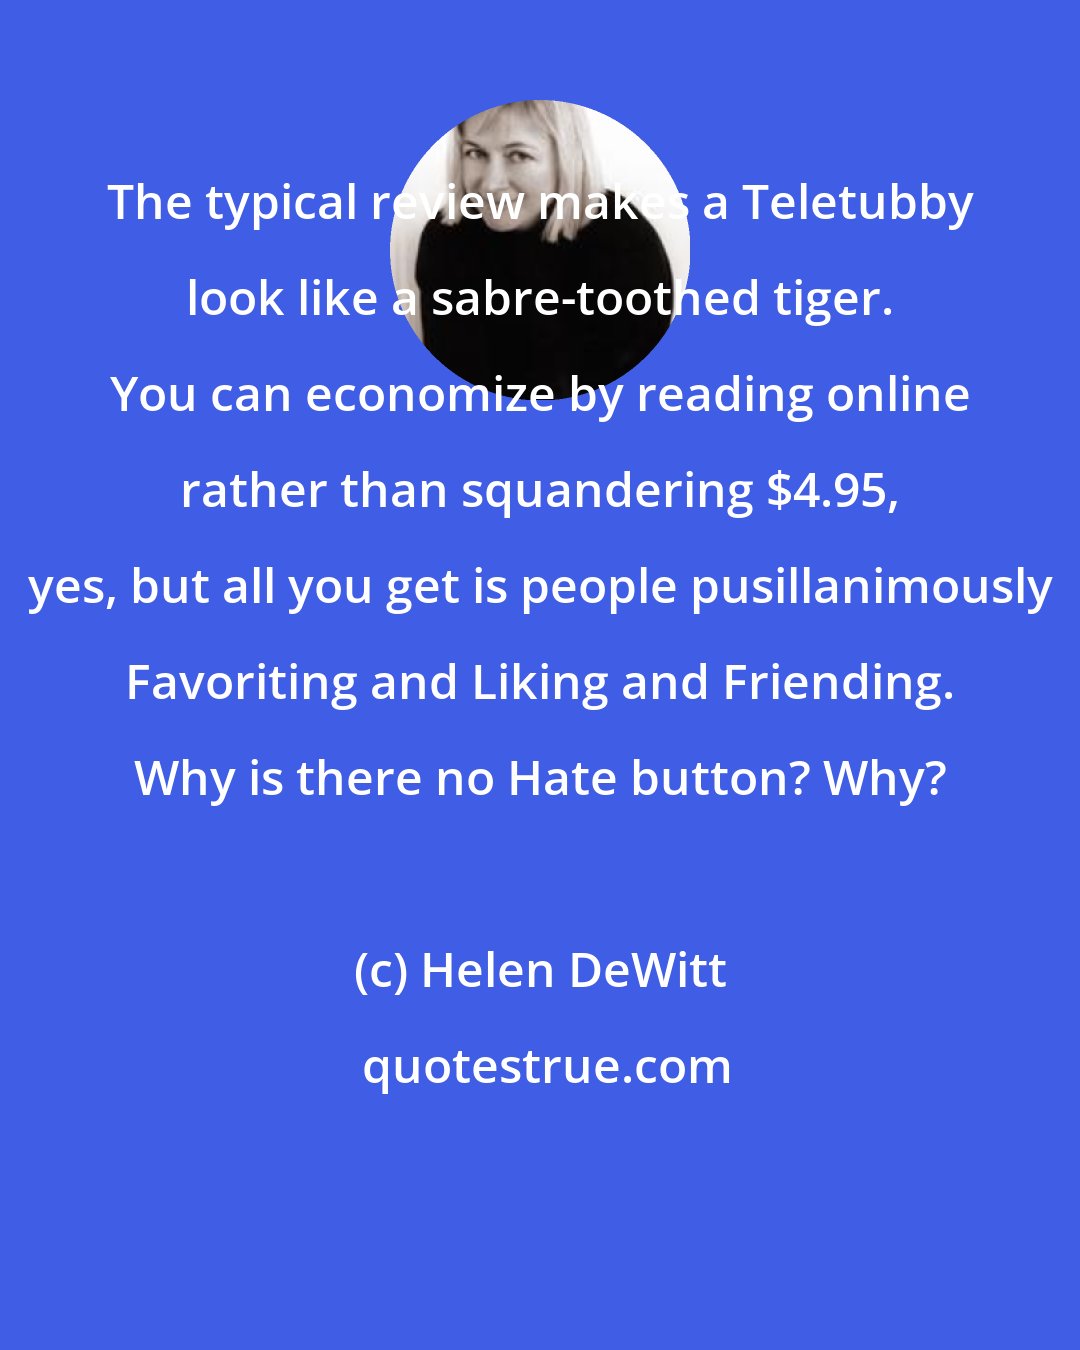 Helen DeWitt: The typical review makes a Teletubby look like a sabre-toothed tiger. You can economize by reading online rather than squandering $4.95, yes, but all you get is people pusillanimously Favoriting and Liking and Friending. Why is there no Hate button? Why?